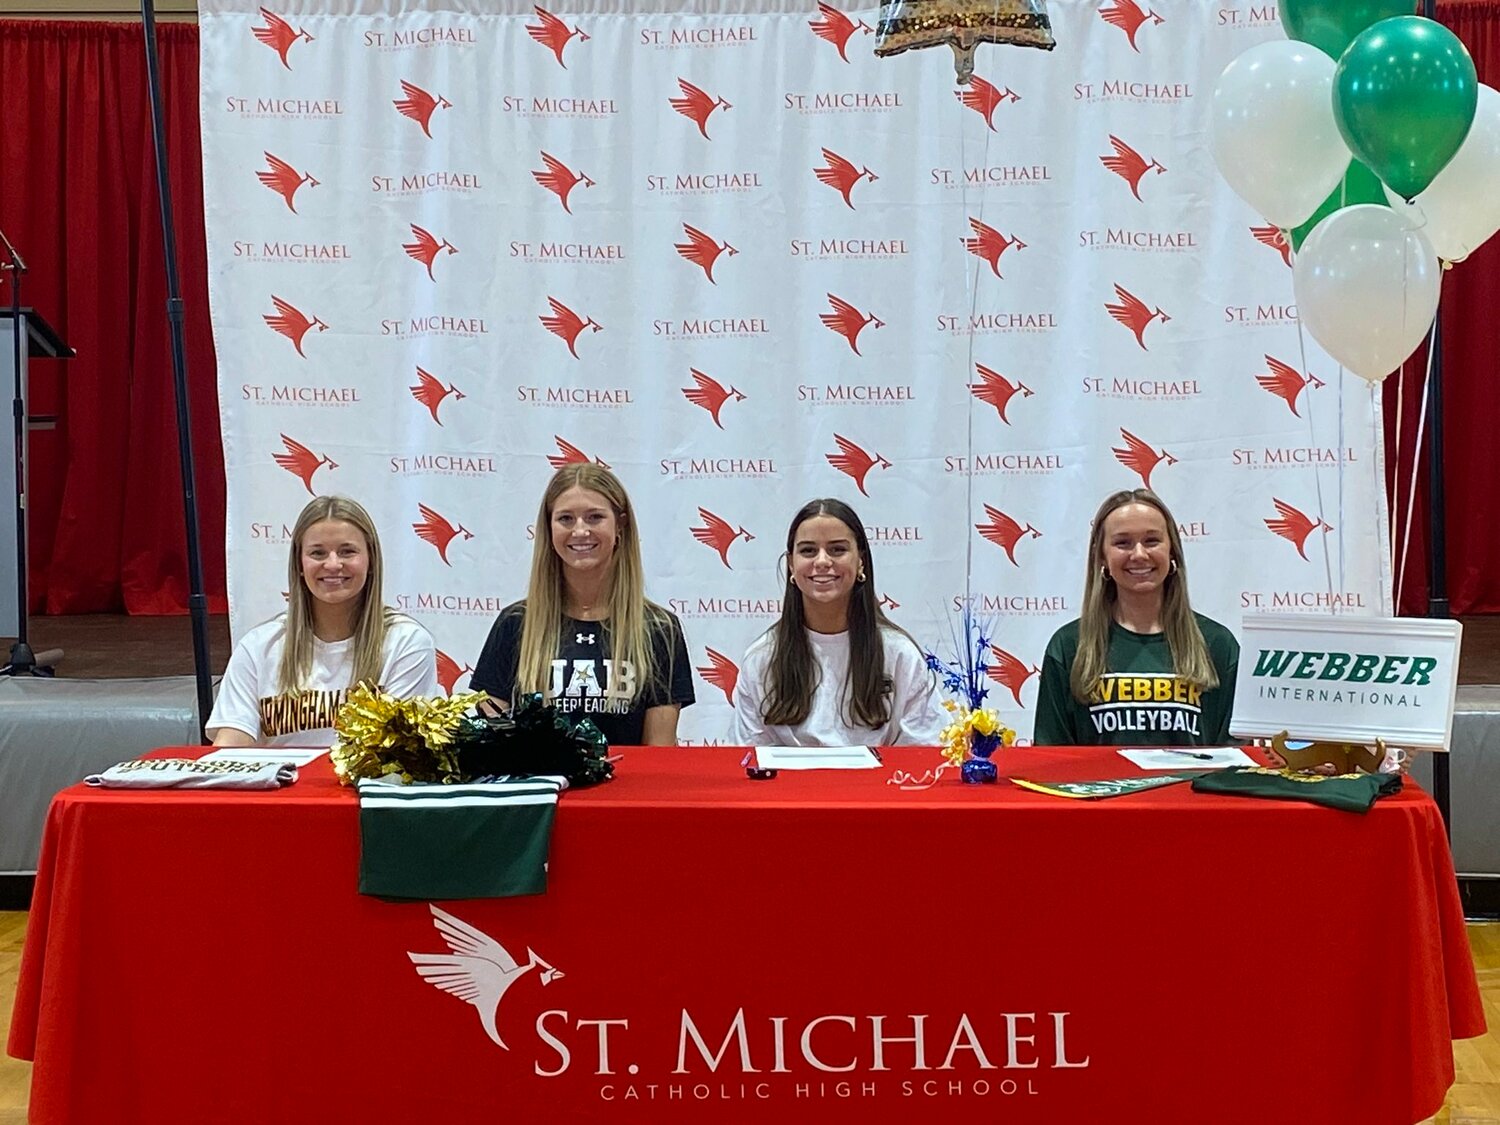 With National Girls and Women in Sports also falling on National Signing Day, four St. Michael Cardinals signed their college commitments during a Feb. 7 ceremony. Pictured from the left are Tatum Hoffman (Birmingham Southern soccer), Landry Mavar (UAB cheerleading), Lizzy Stroud (Southern Union soccer) and Bryanna Marks-Craig (Webber volleyball).